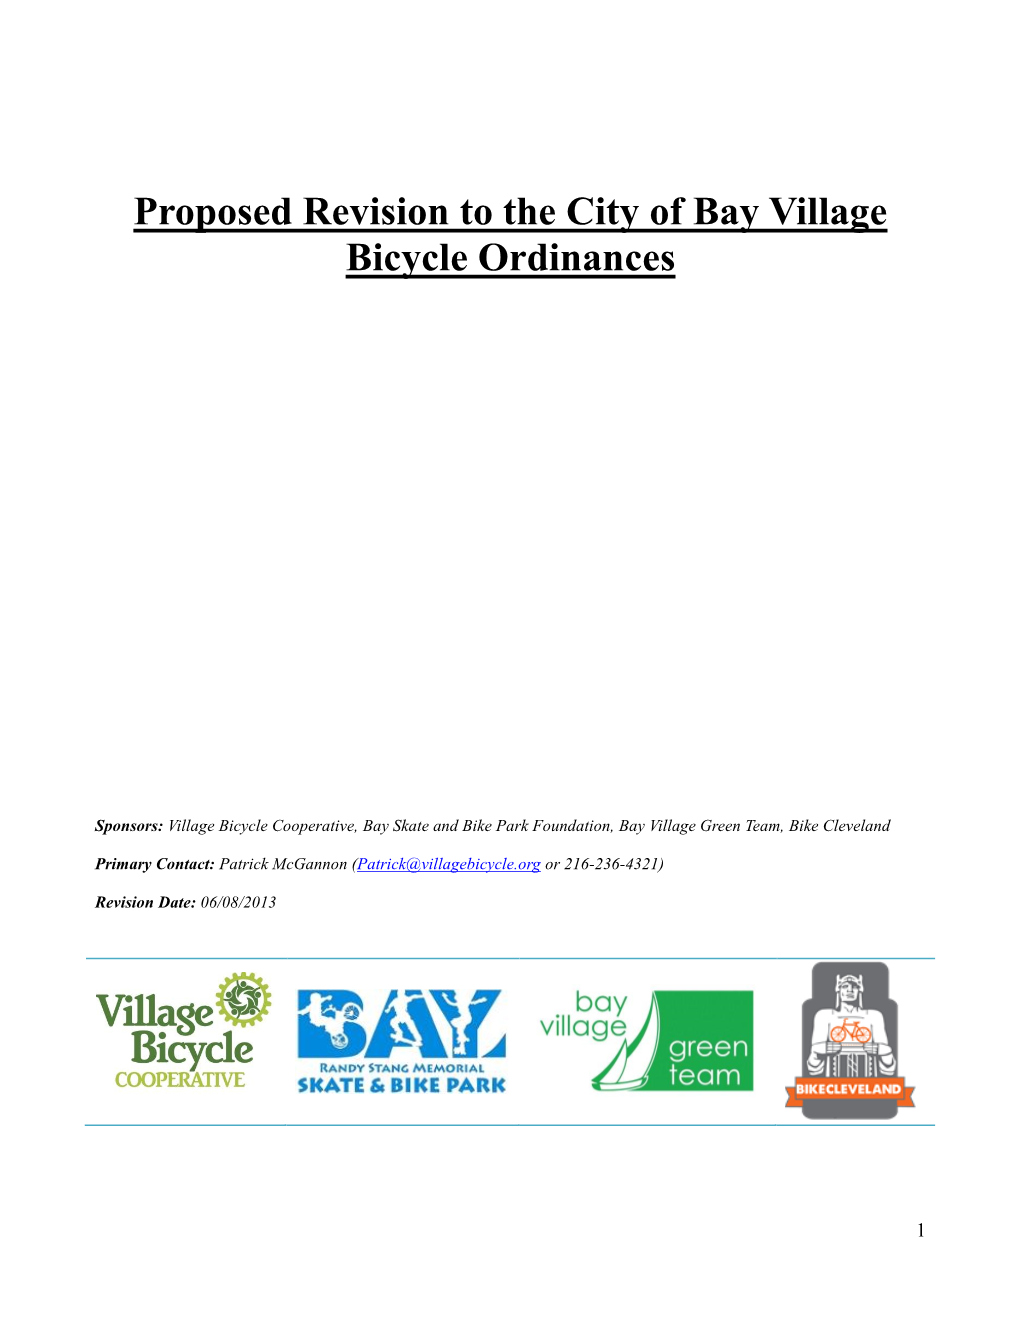 Proposed Revision to the City of Bay Village Bicycle Ordinances